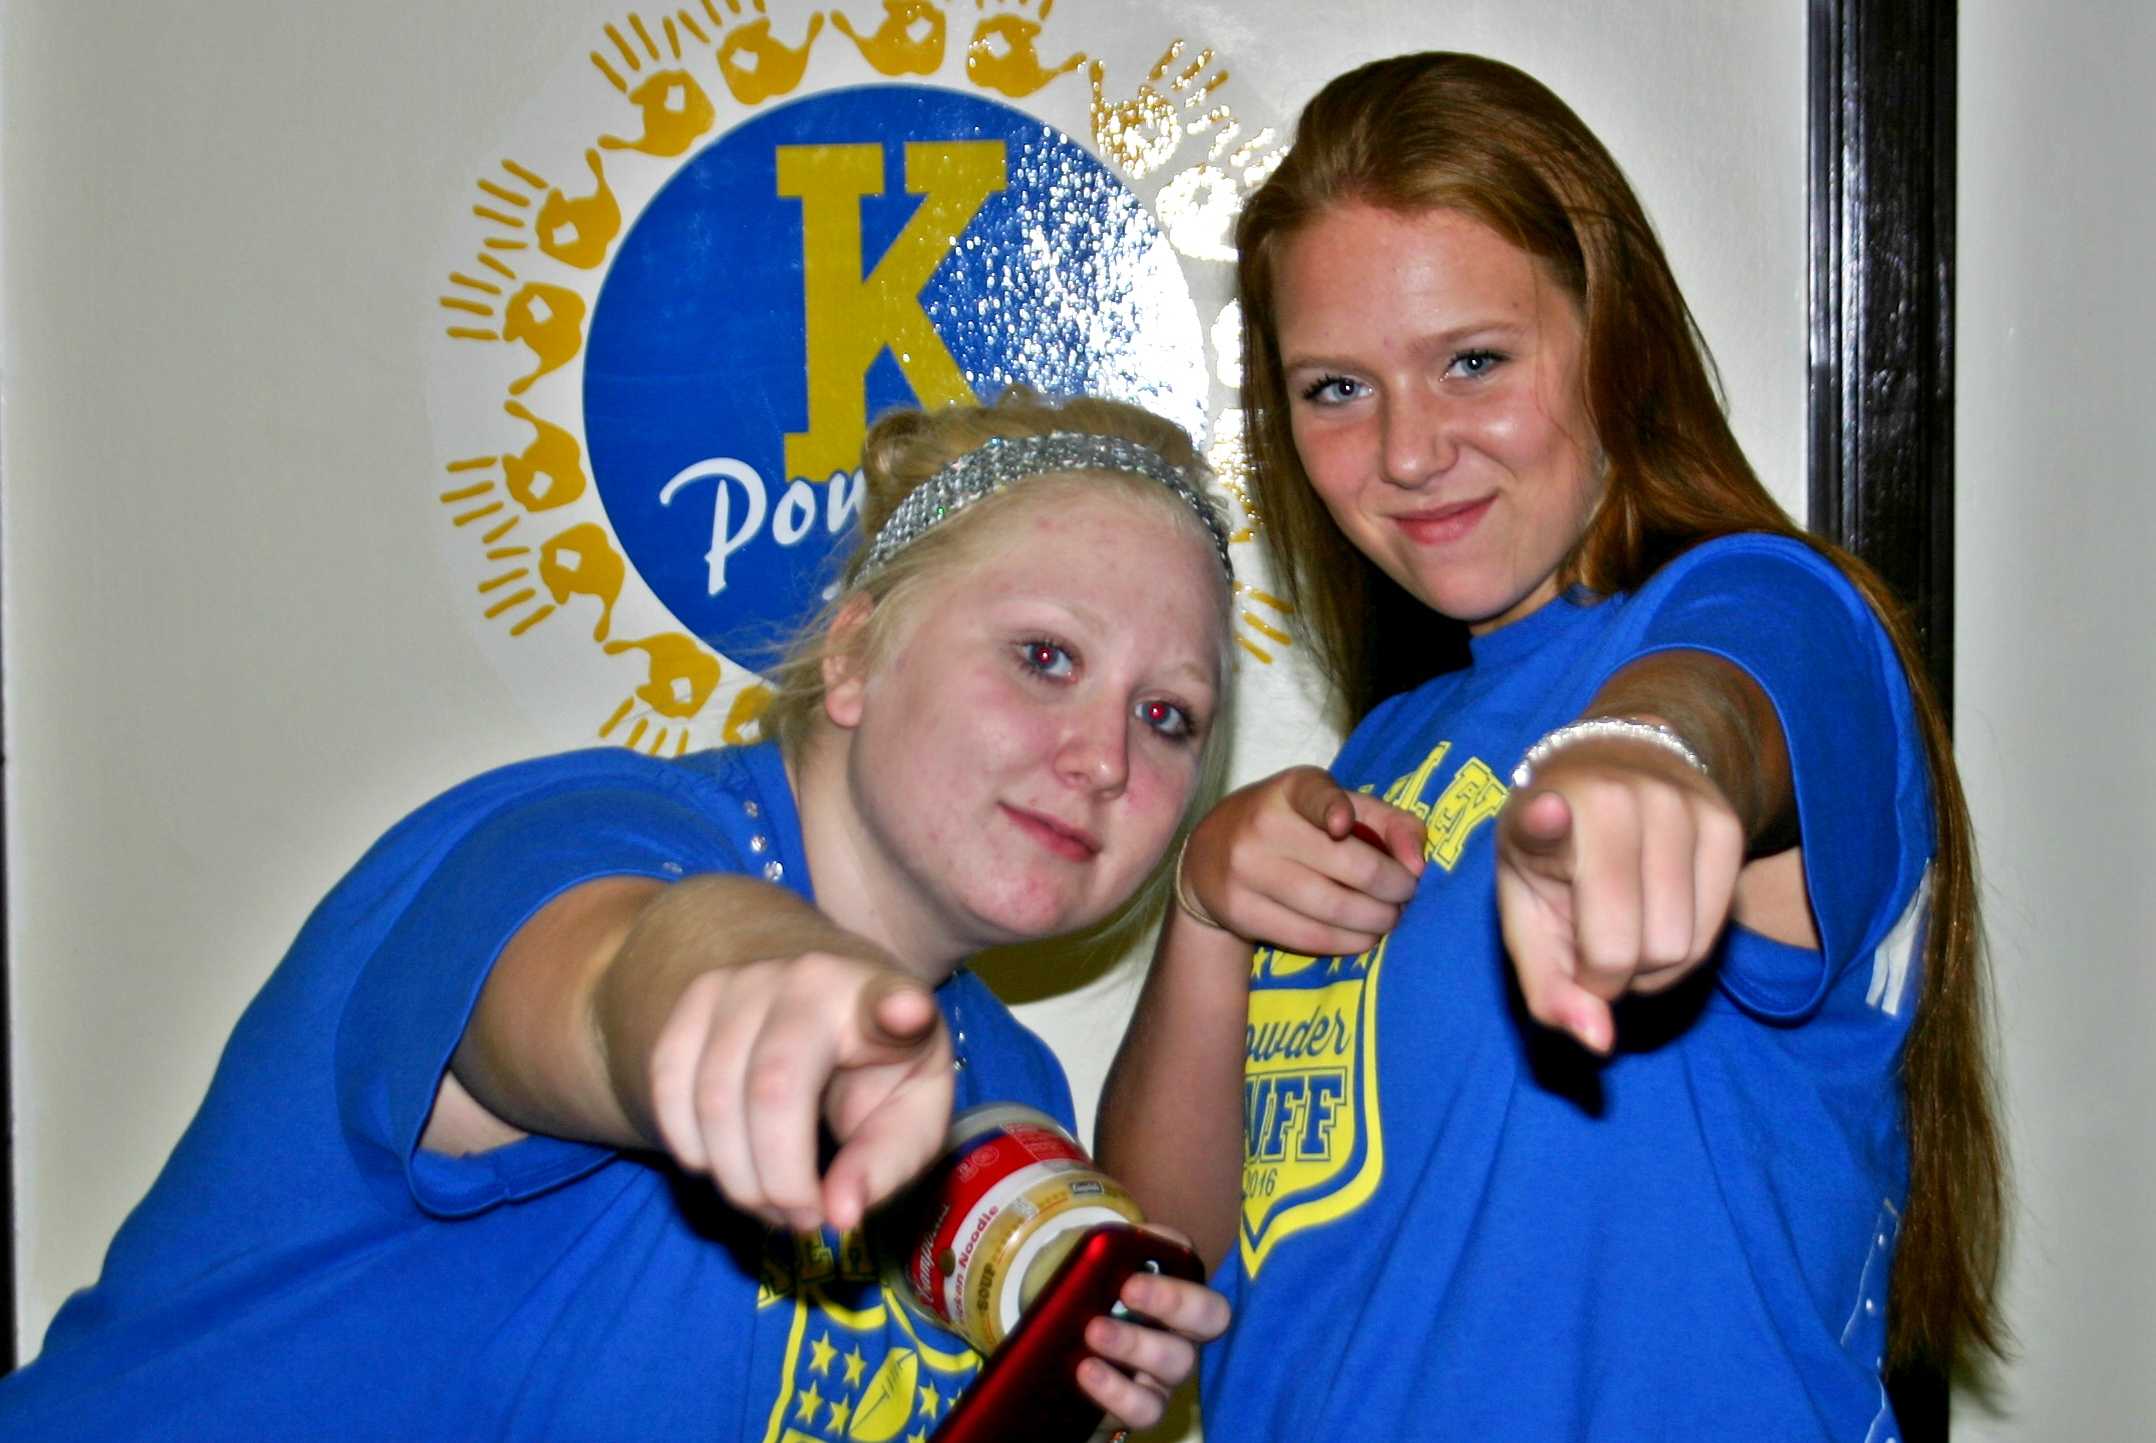 Seniors Sam Lepard (left) and Savanna Wallace are ready to play in the powder puff championship Wednesday, Oct. 5.